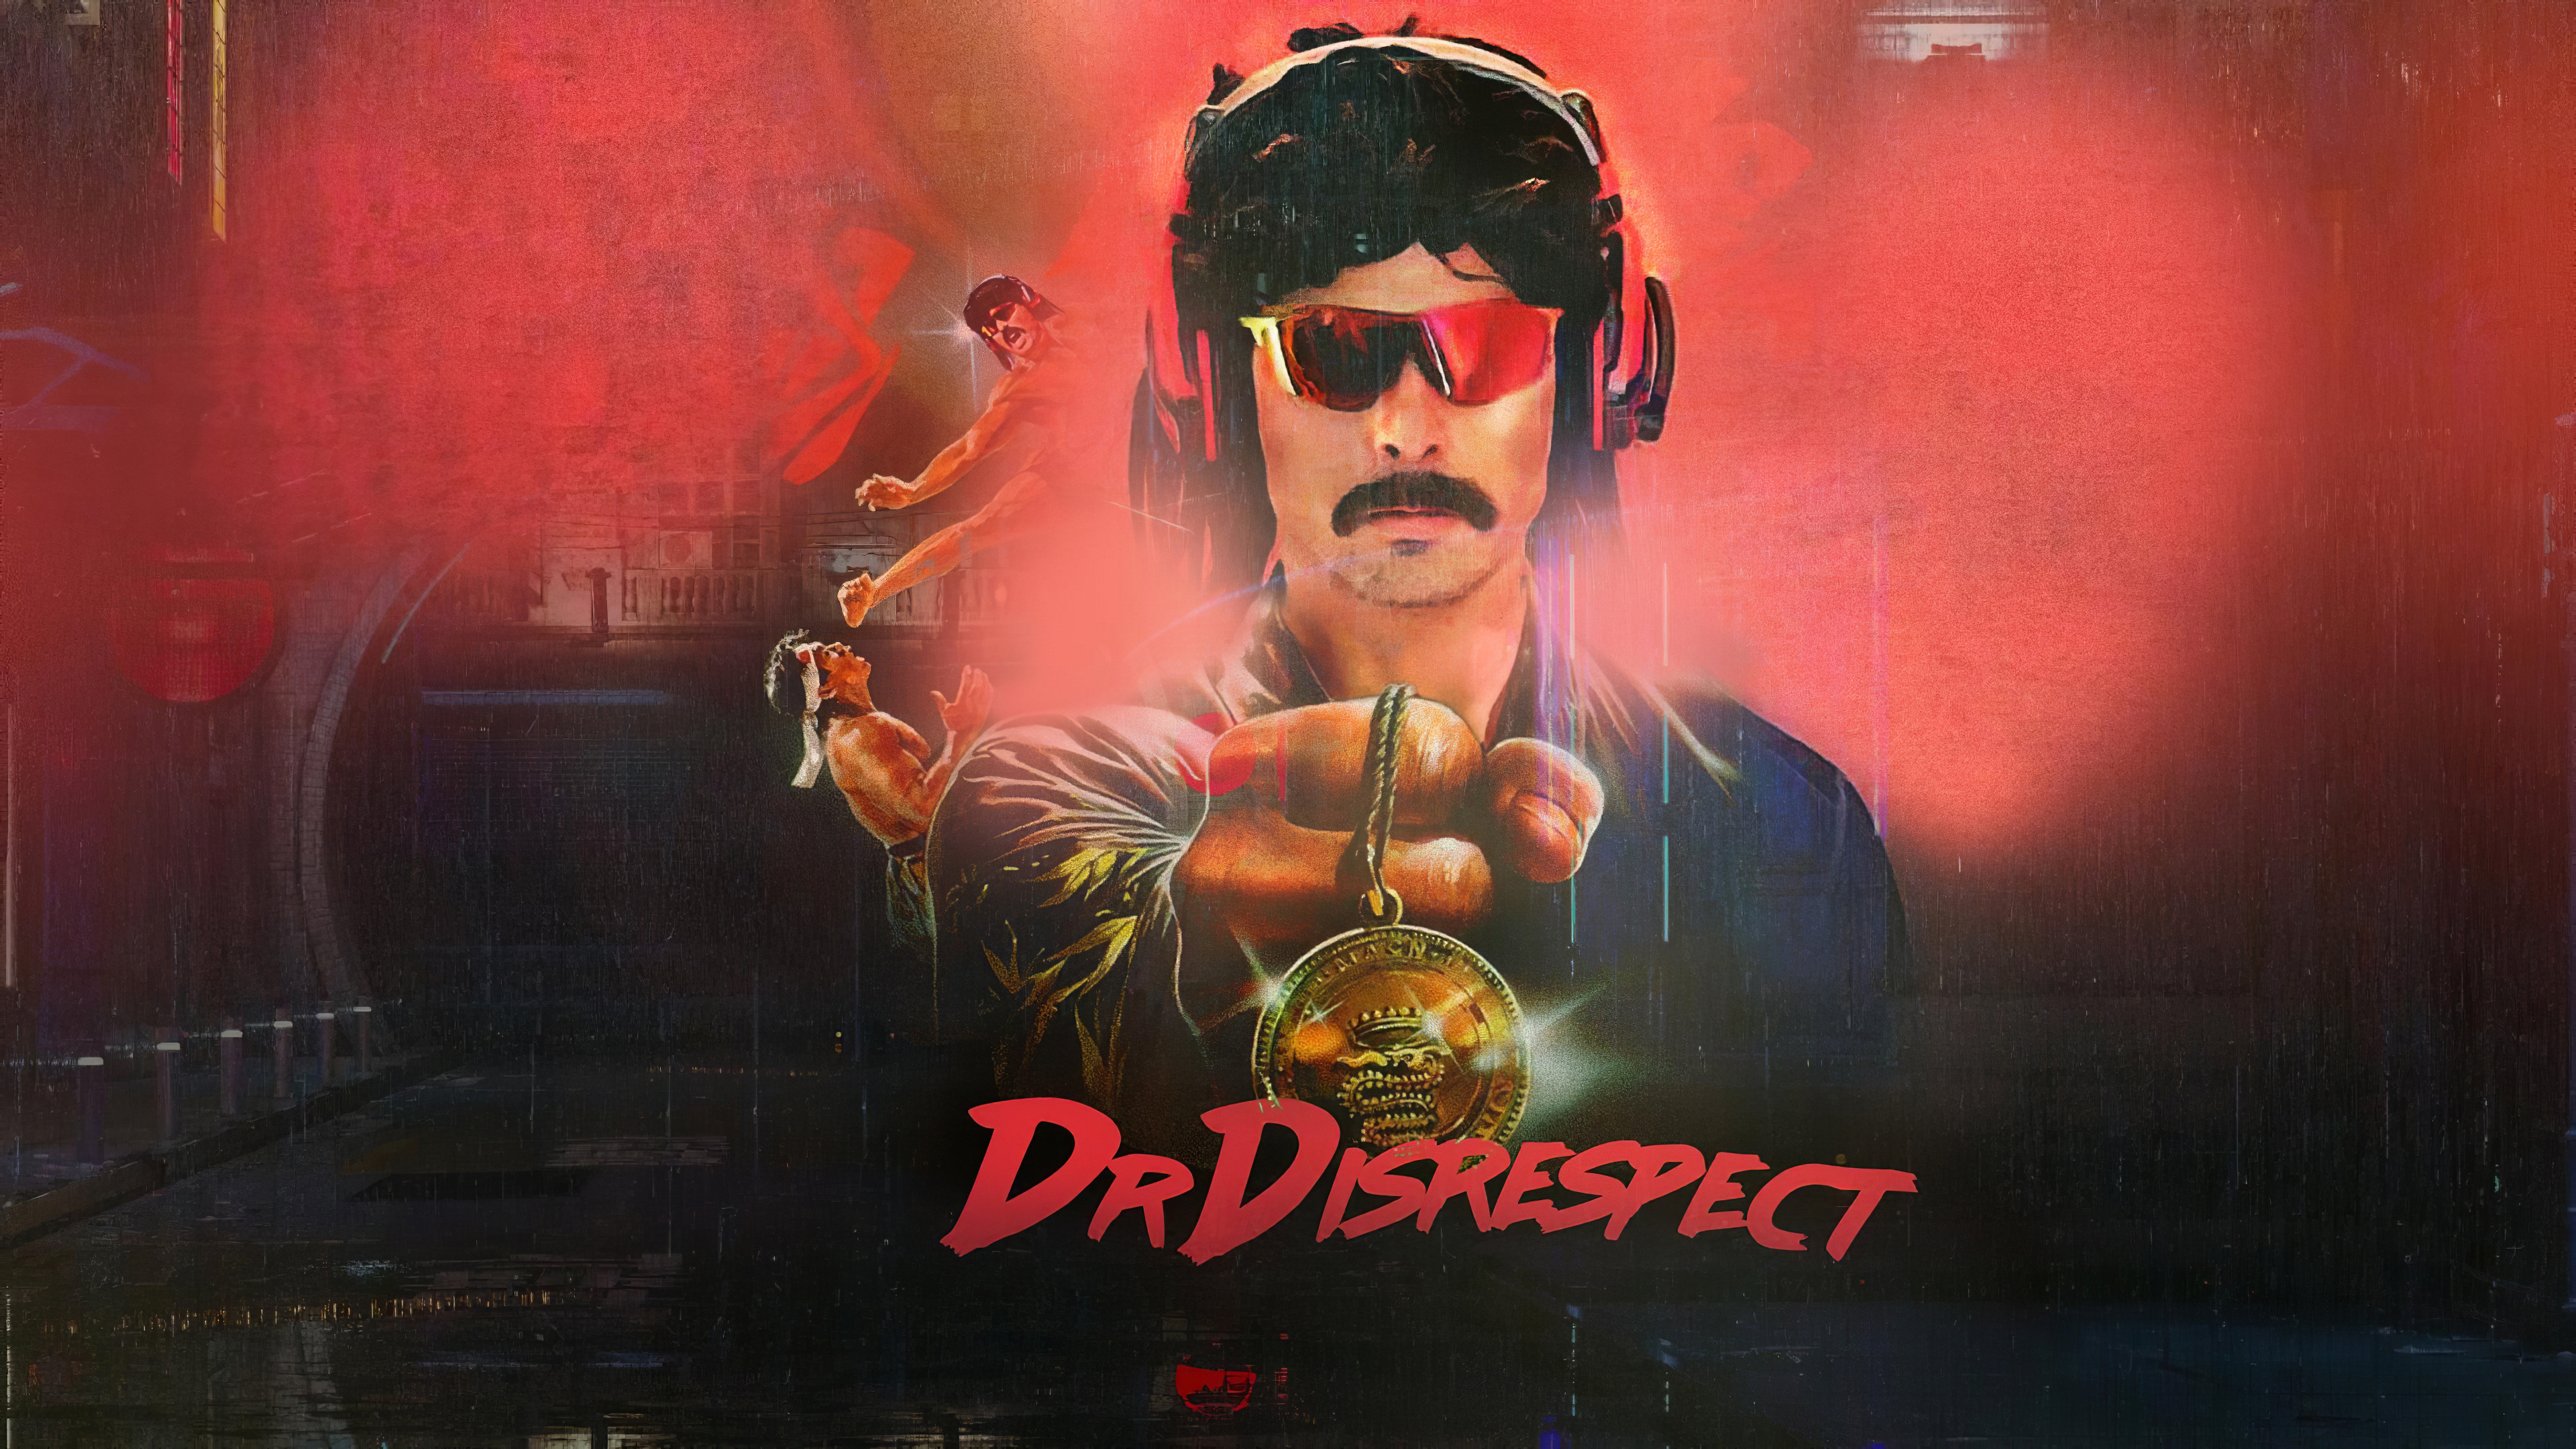 People 3840x2160 dr. disrespect 4K frontal view celebrity Youtuber internet personality